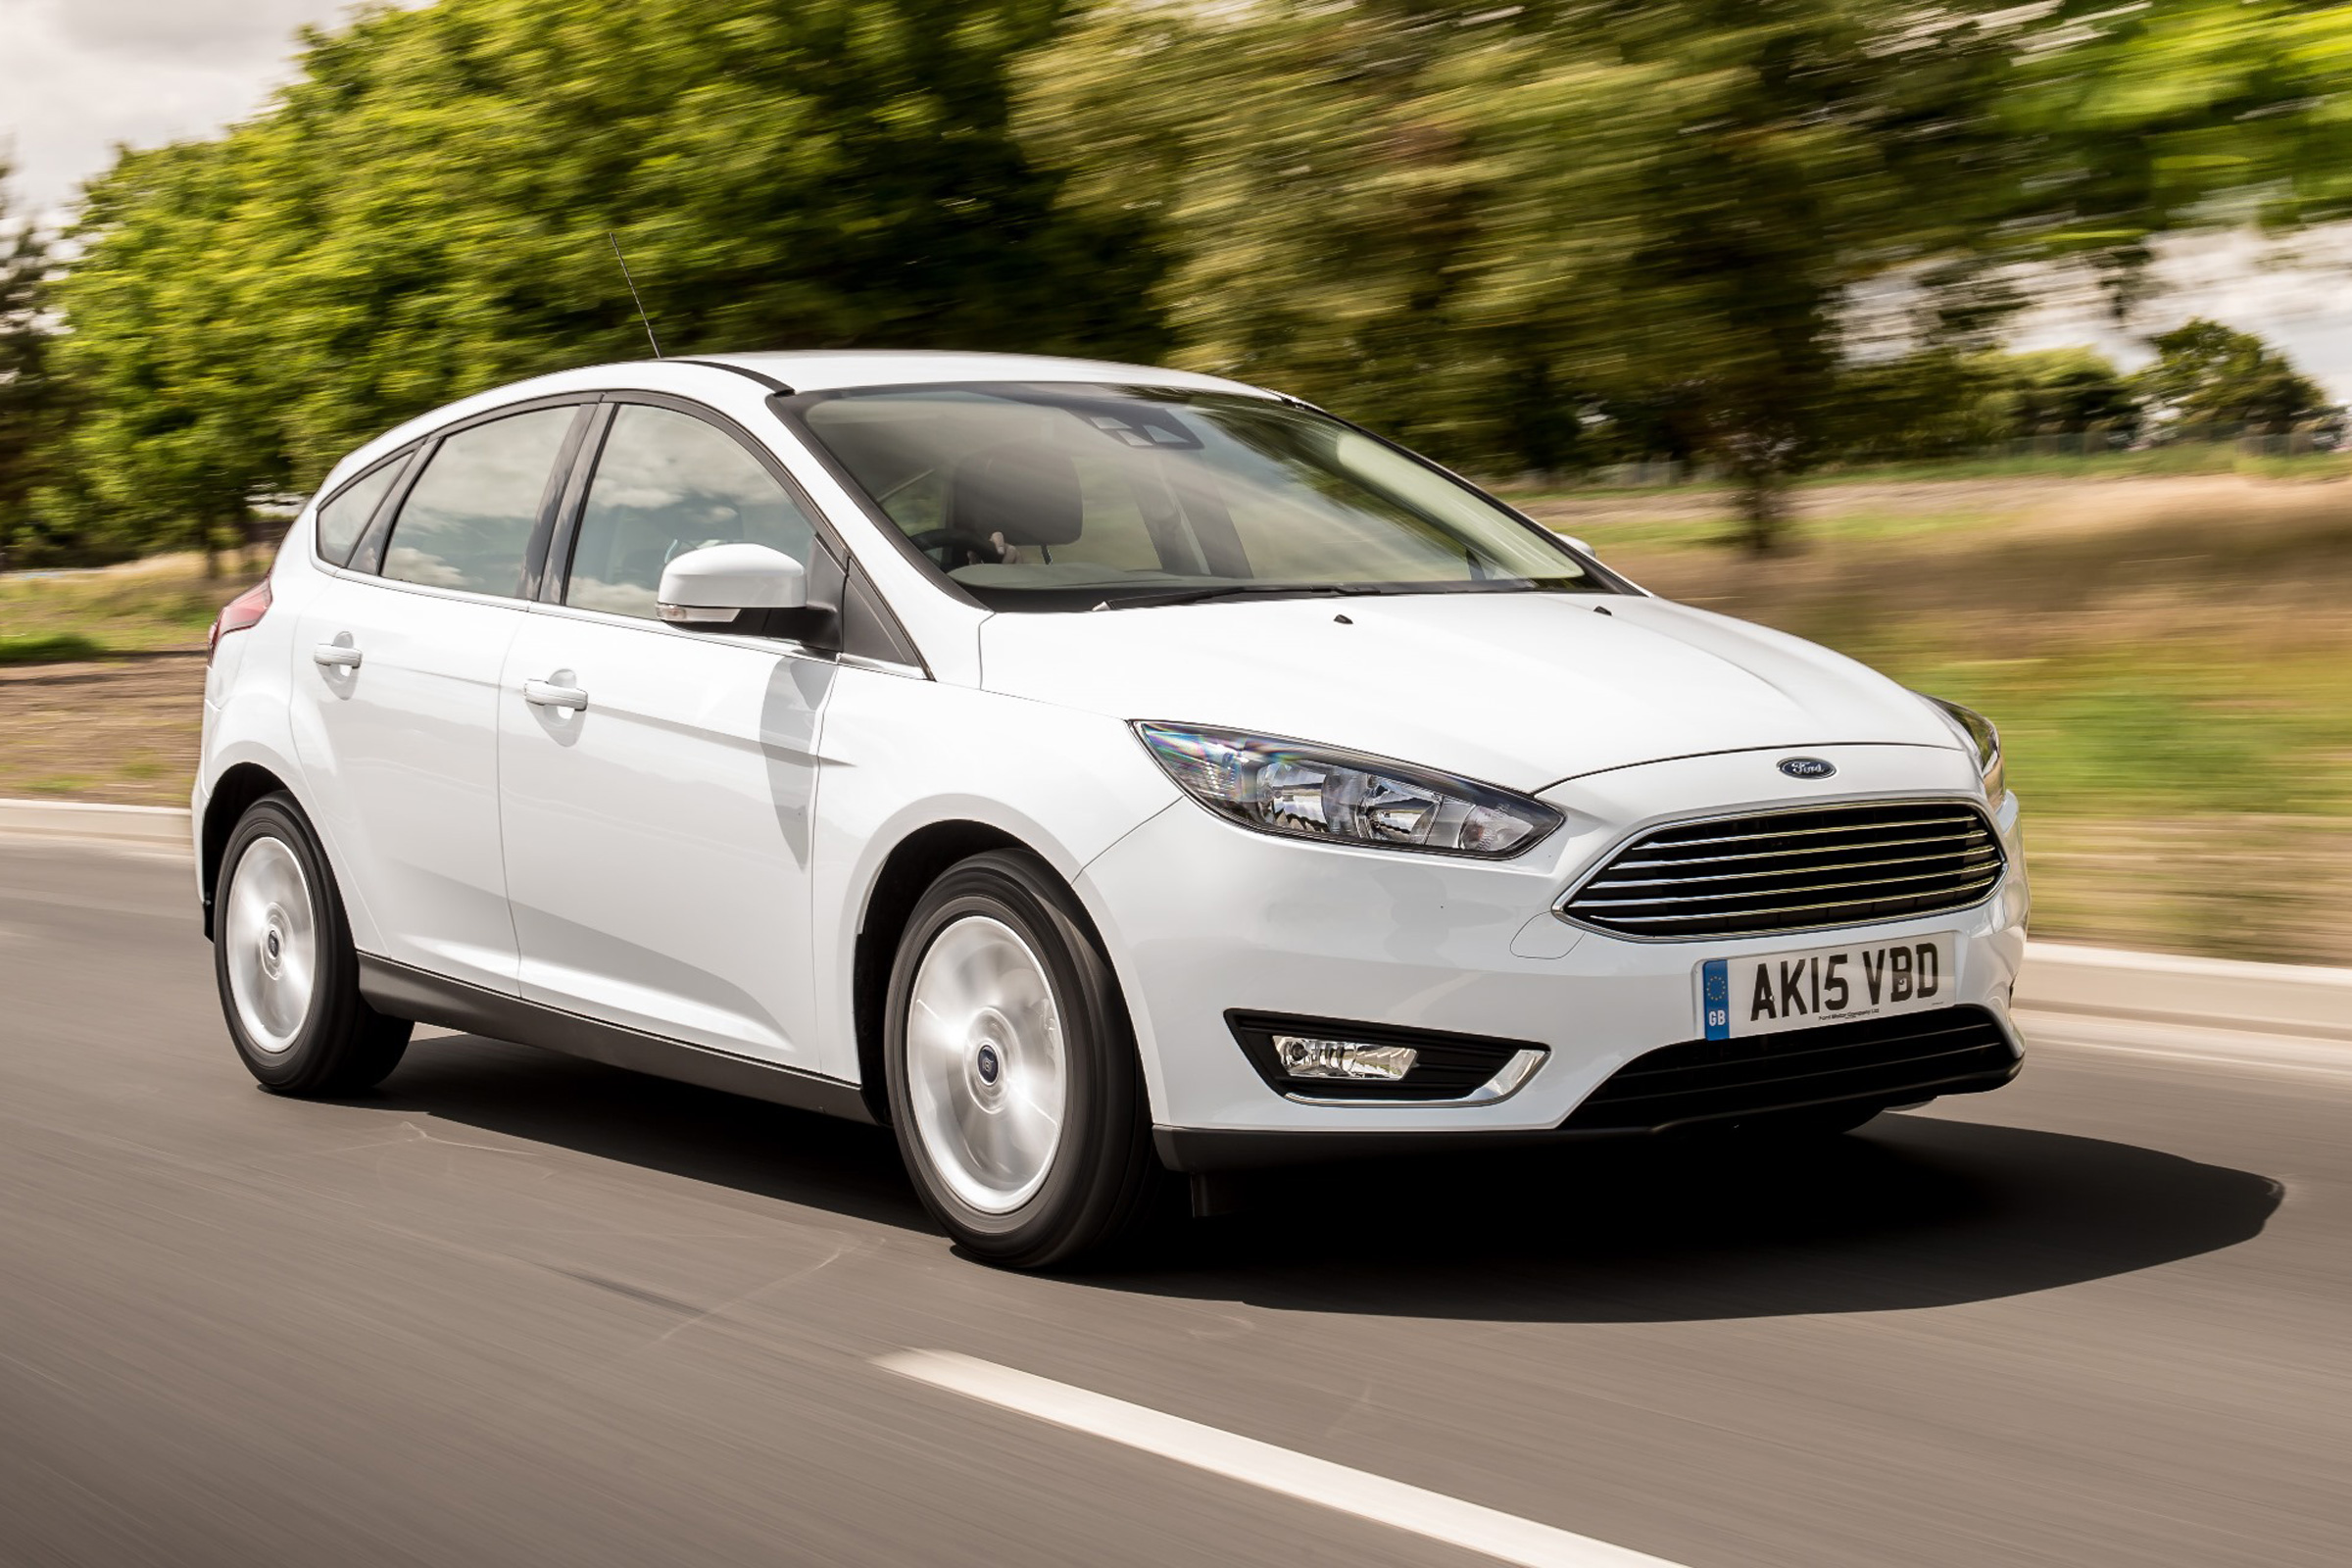 Used Ford Focus review: 2011 to 2018 (Mk3)